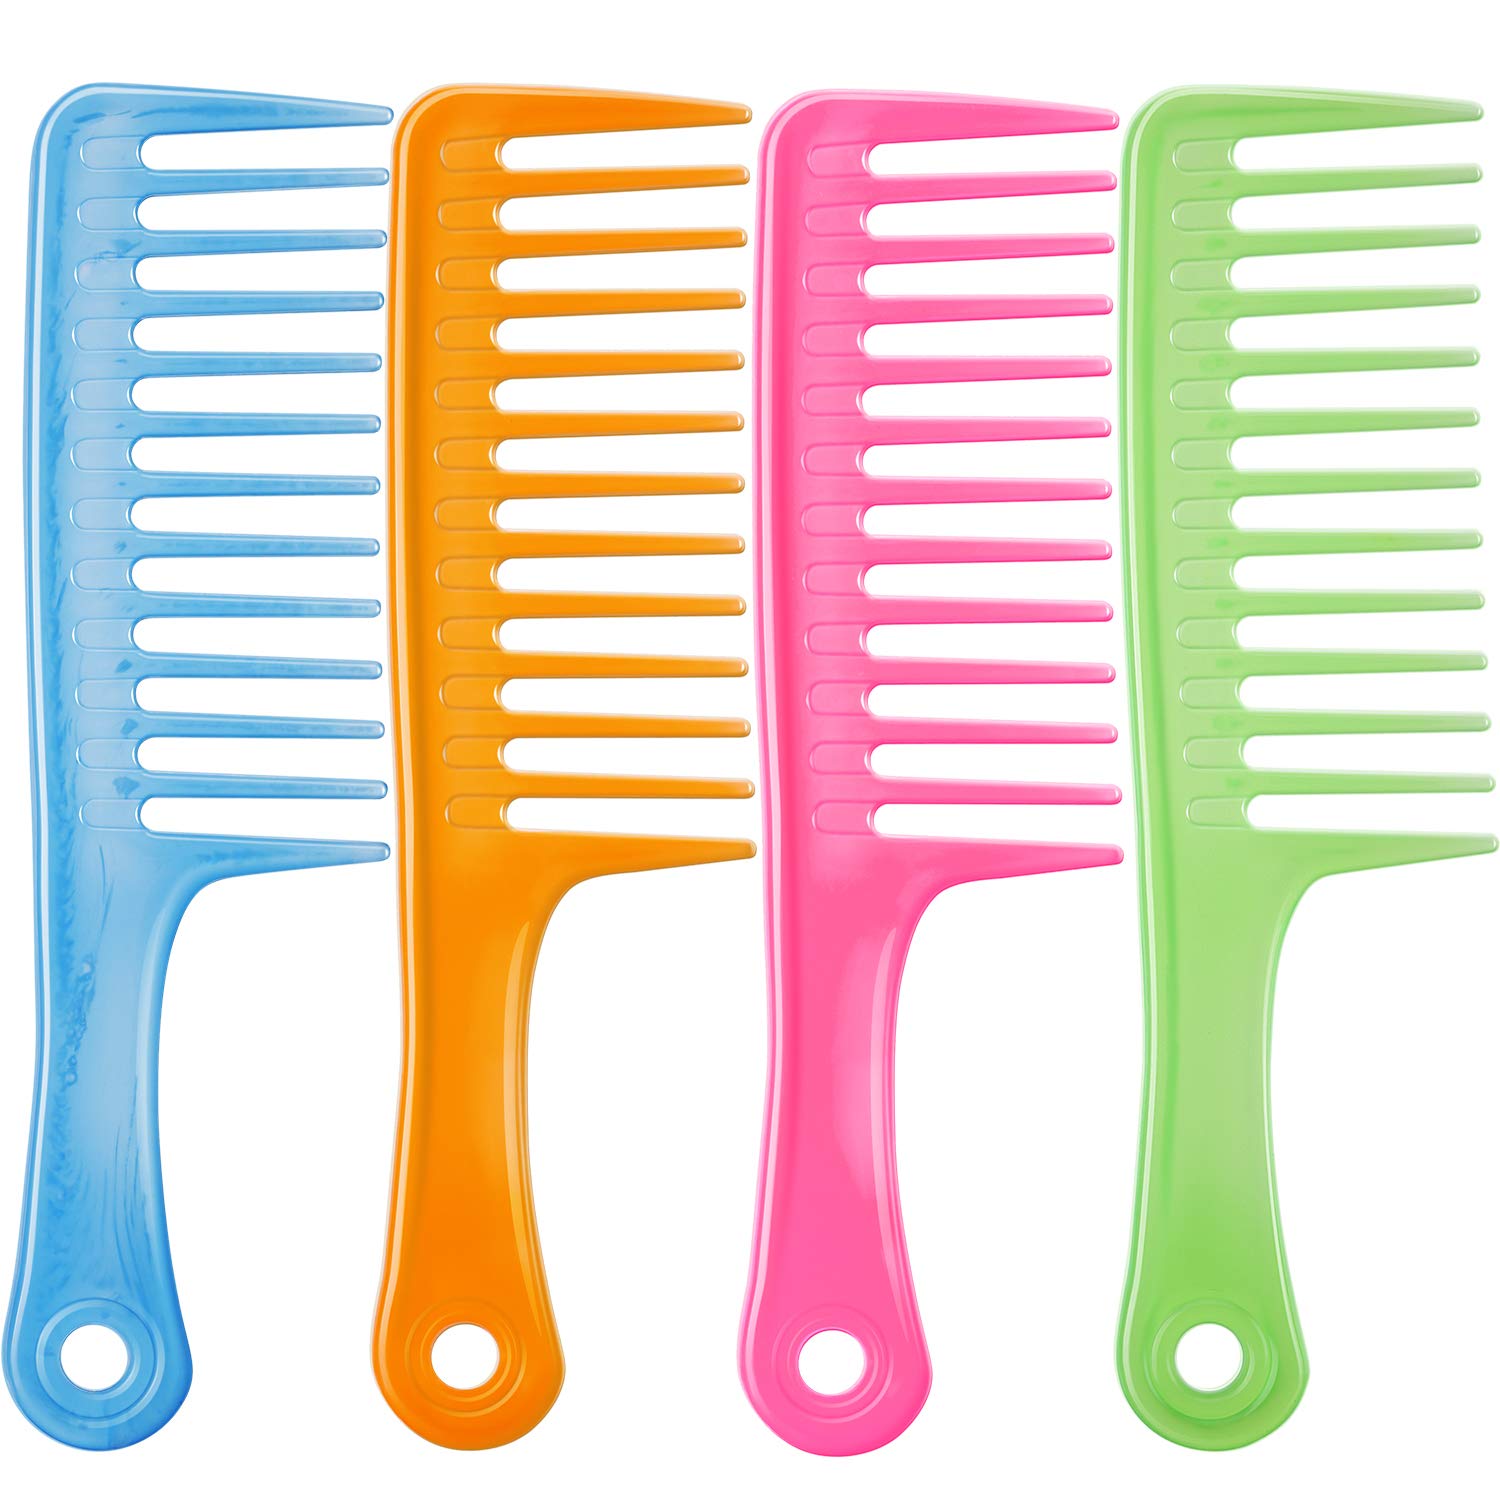 4 Pieces 9 1/2 Inches Anti Static Large Tooth Detangle Comb, Wide Tooth Hair Comb Salon Shampoo Comb for Long Hair and Curly Hair (Mutil Color 3)